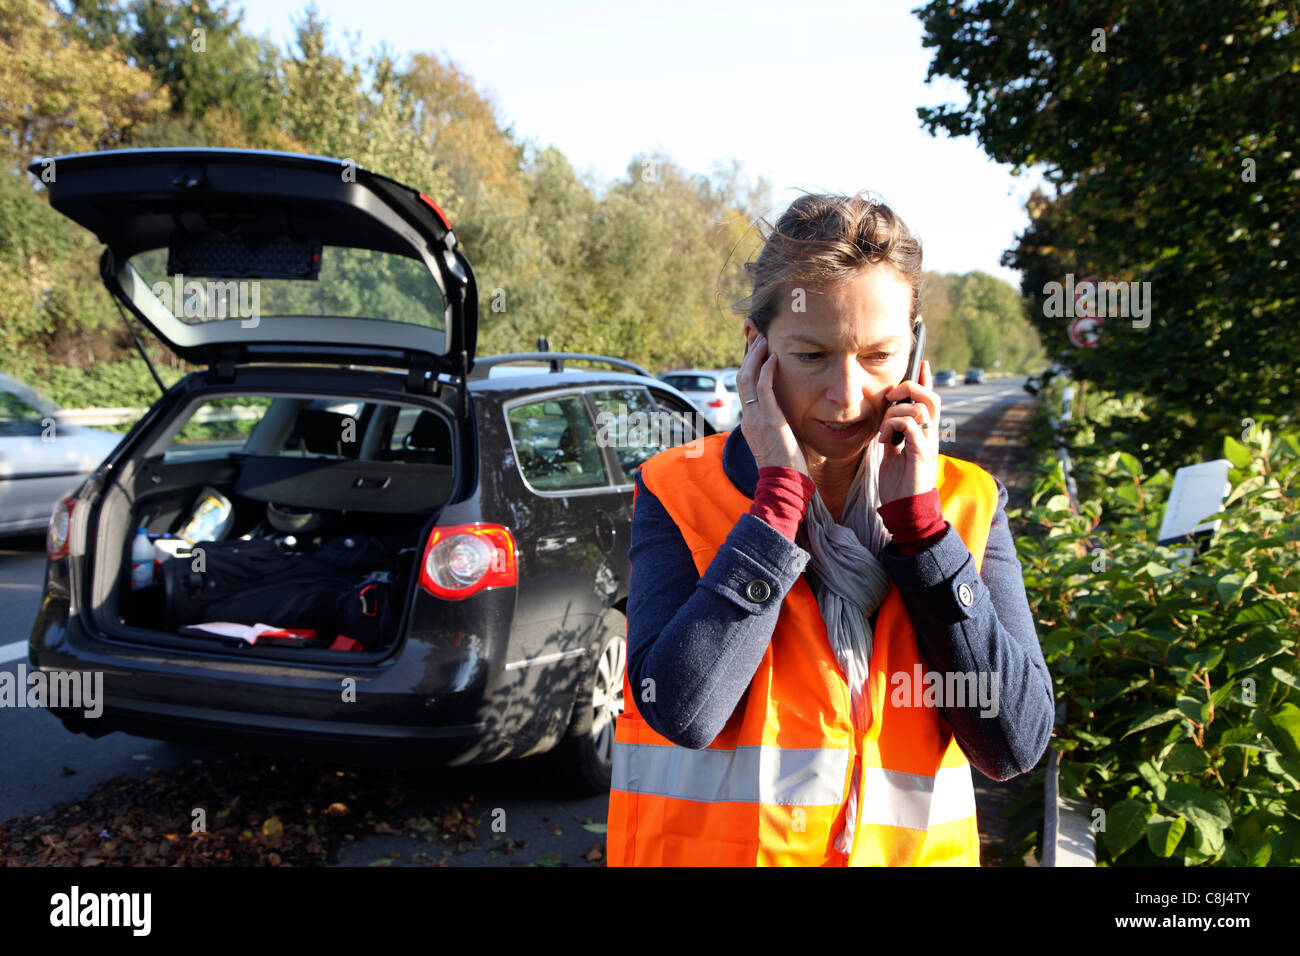 Car breakdown on a highway, woman, female driver, wearing a high visibility vest, calling for help with her mobile phone. Stock Photo